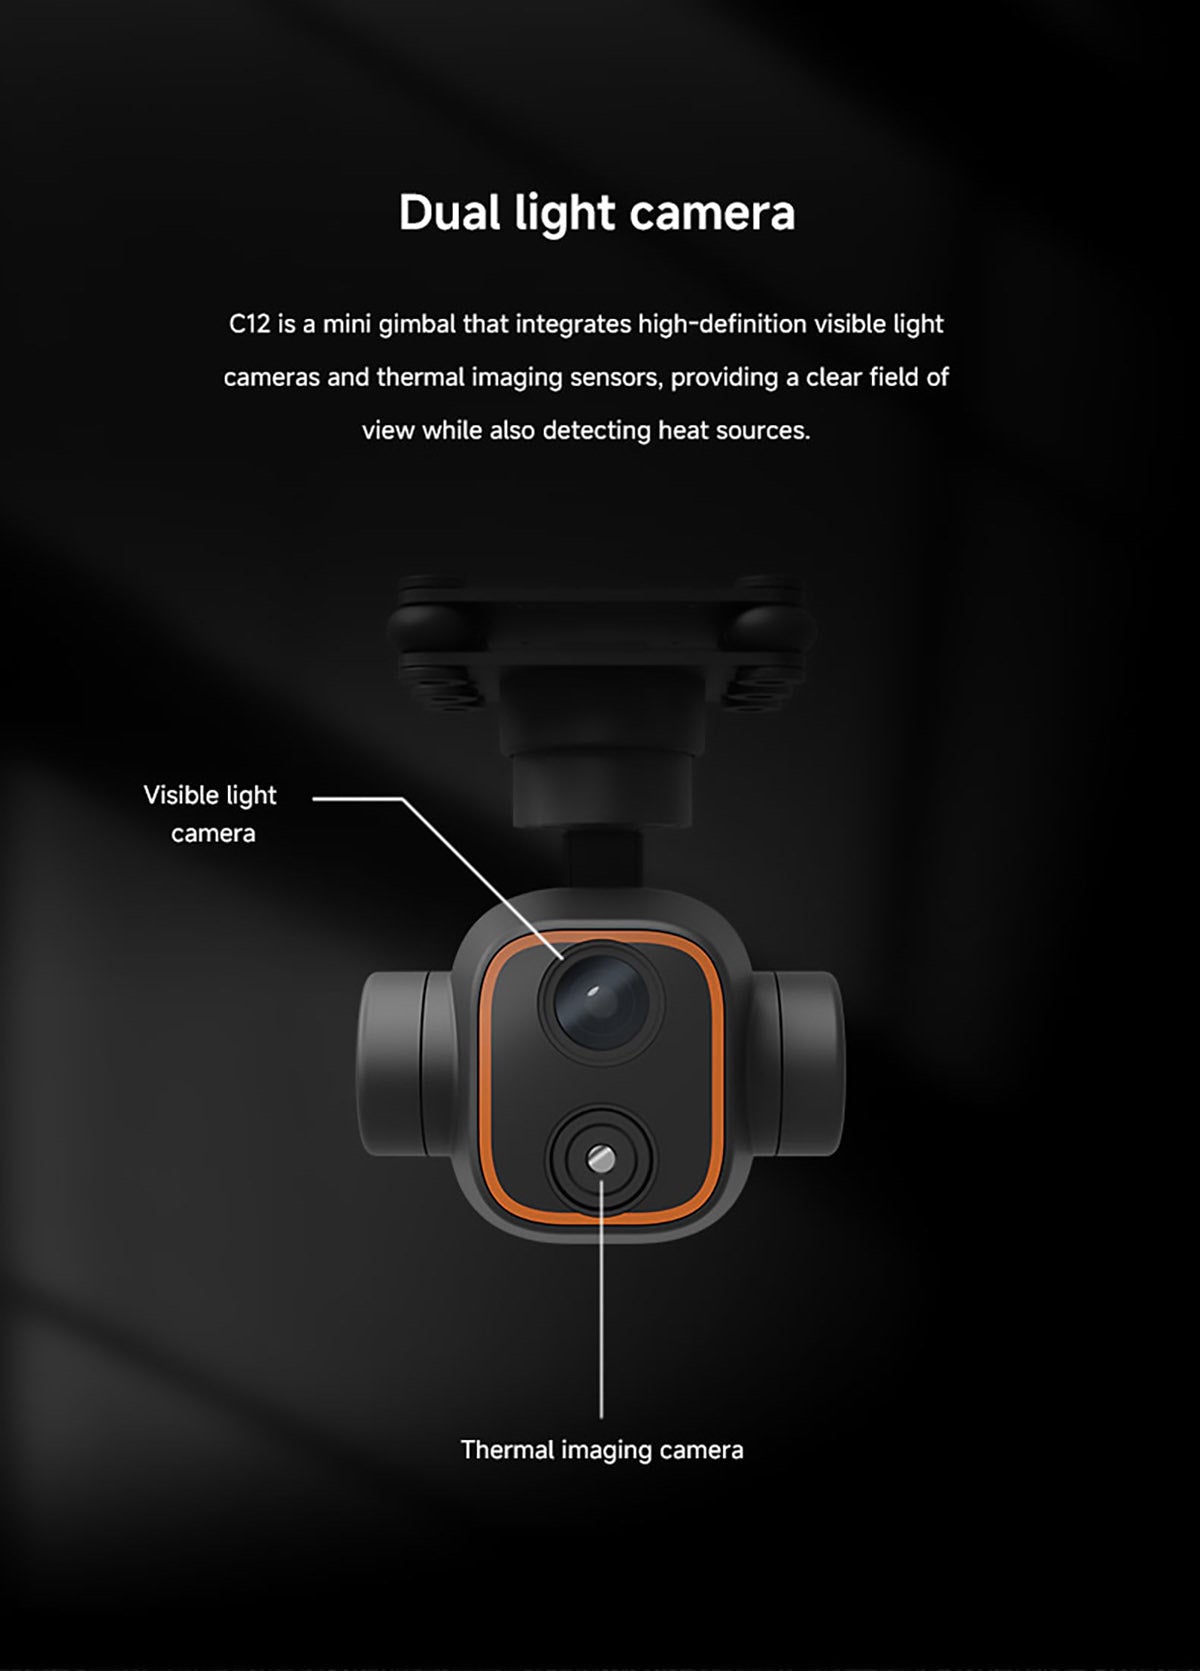 Skydroid C12 Drone Gimbal, Drone gimbal with dual-light camera: 2K HD visible light + thermal imaging sensor for clear visuals & heat detection.